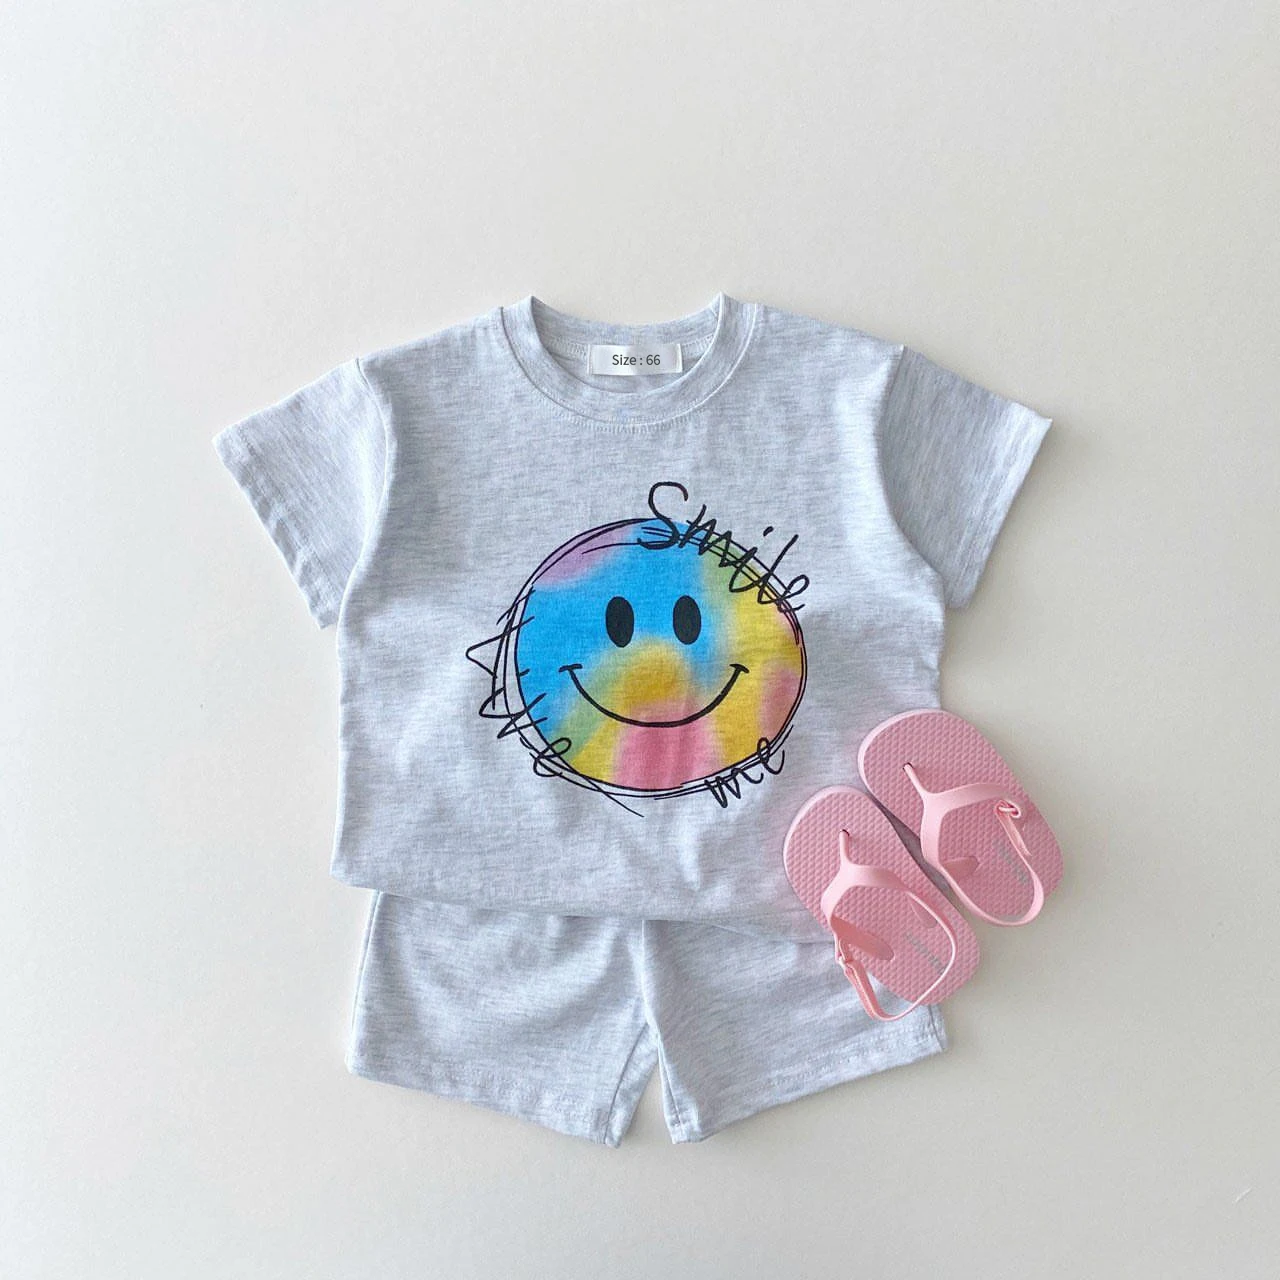 2022 New Infant Clothing Baby Candy Colors Print Letter Short-sleeved Smile Tops+Shorts Suit Toddler Tees And Short Pants Set